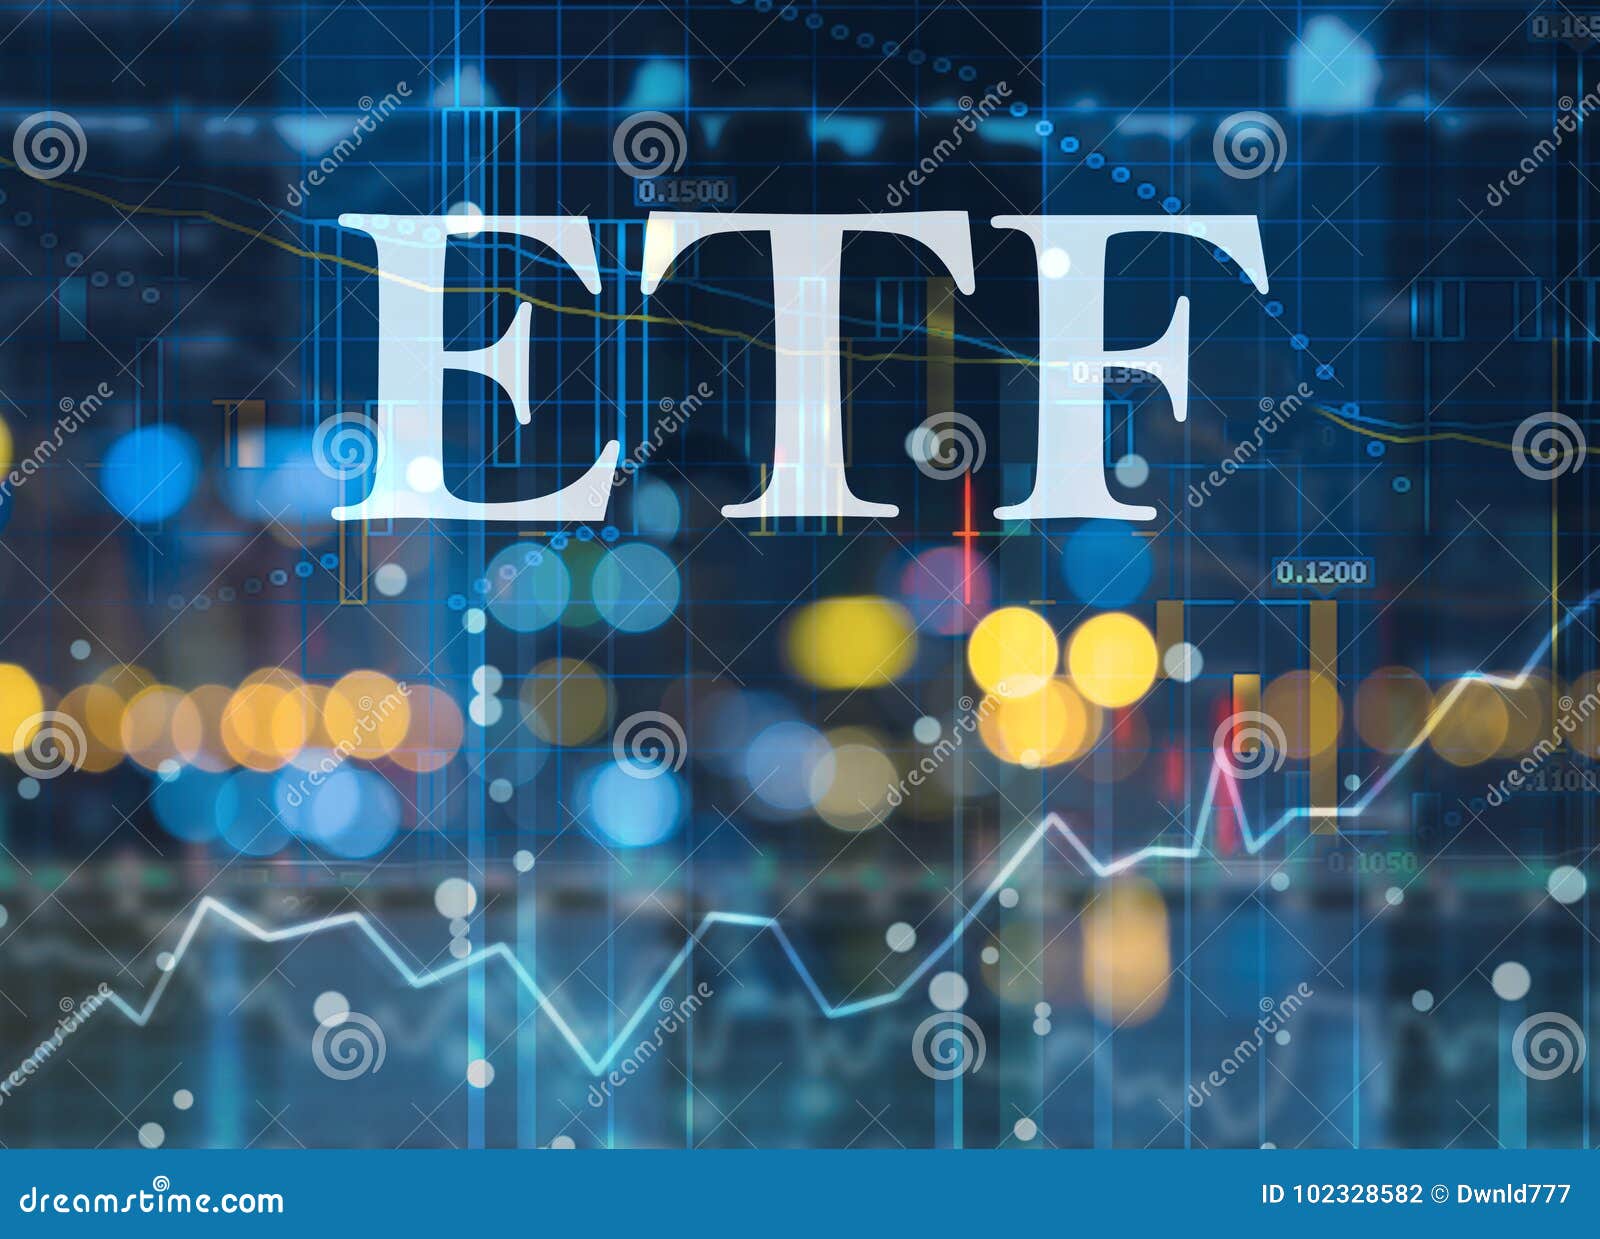 etf, exchange traded funds